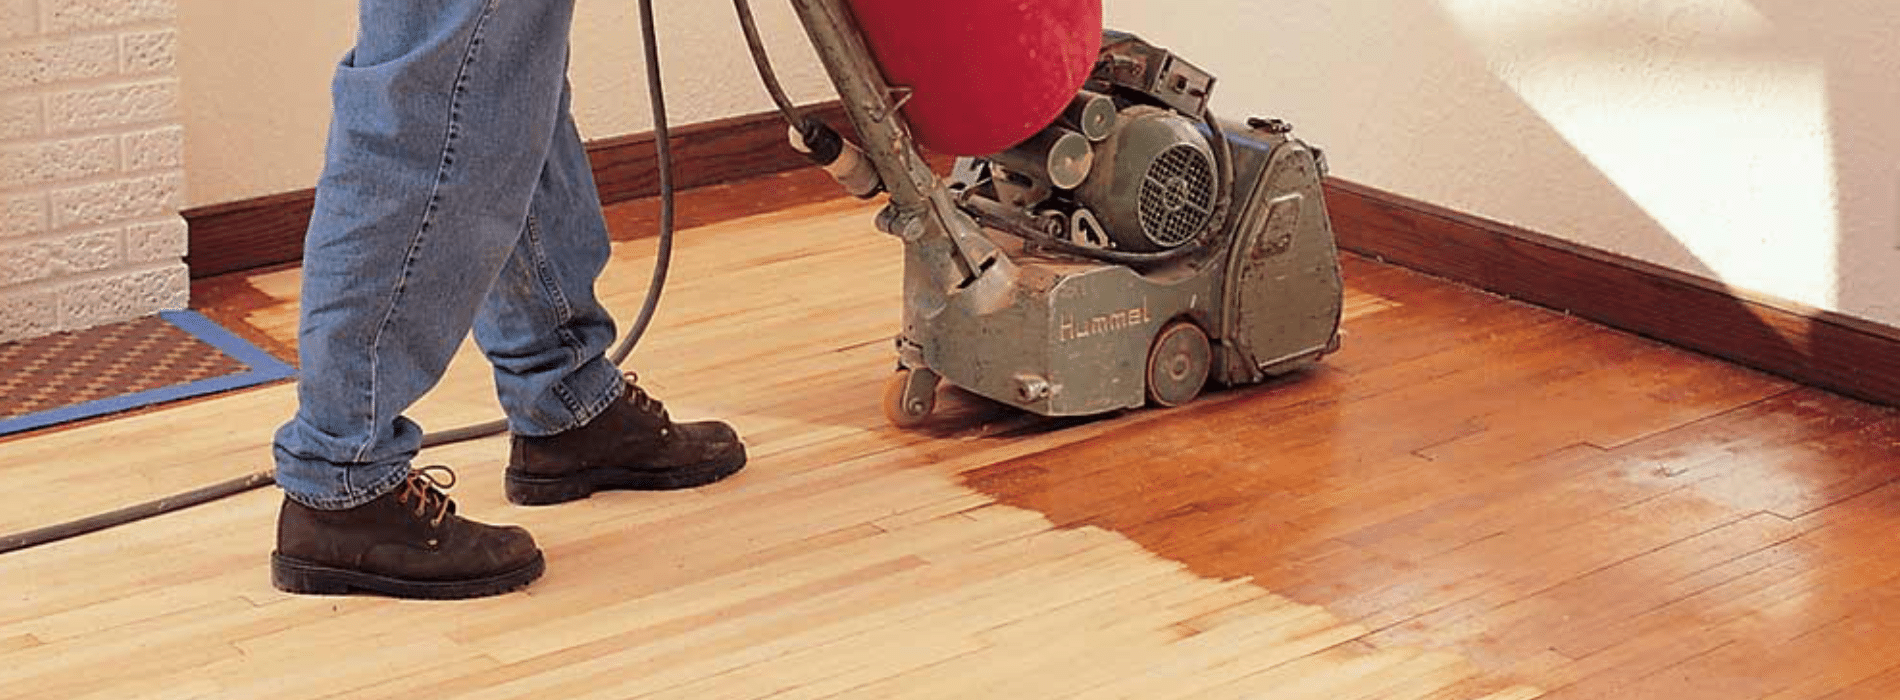 Mr Sander® are using a Bona Scorpion, a 200mm drum sander, for sanding a herringbone floor in South Norwood, SE25. With a power of 1.5kW, it operates at 240V and 50Hz. The sander is connected to a dust extraction system with a HEPA filter, ensuring a clean and efficient sanding process.